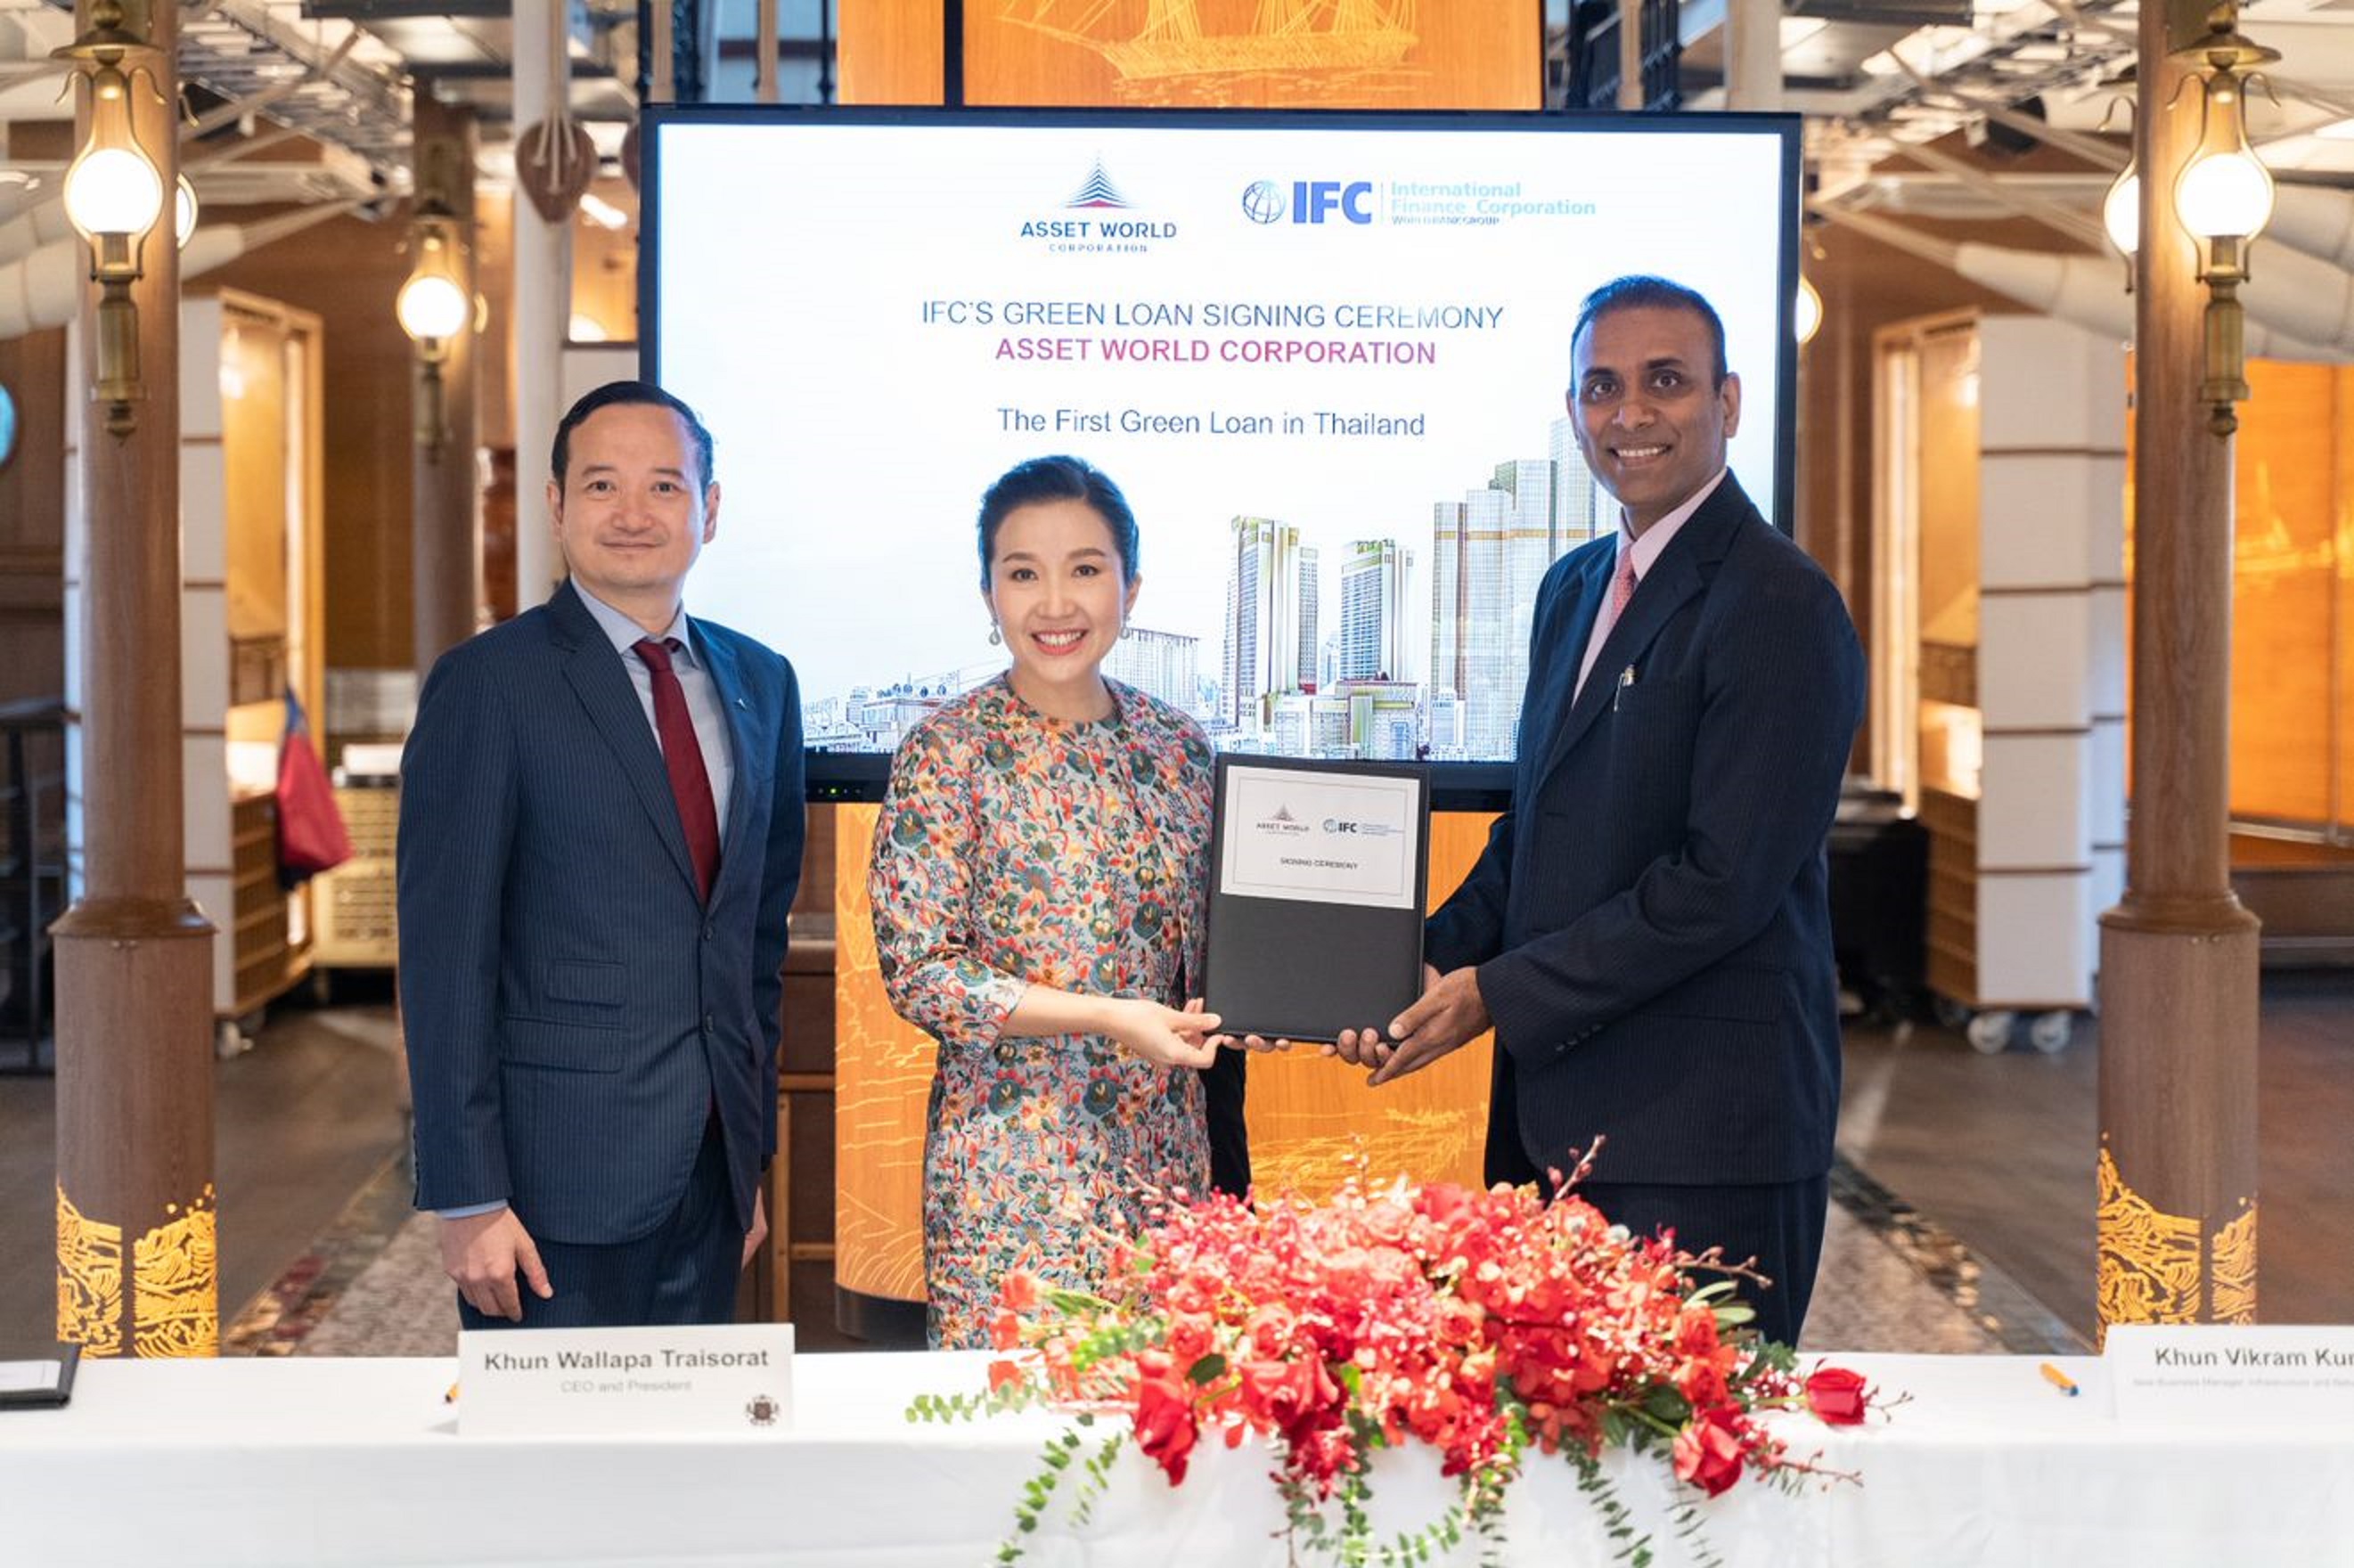 Asset World Corporation is Thailands First Real Sector Company to Receive a Green Loan from the World Bank Groups IFC